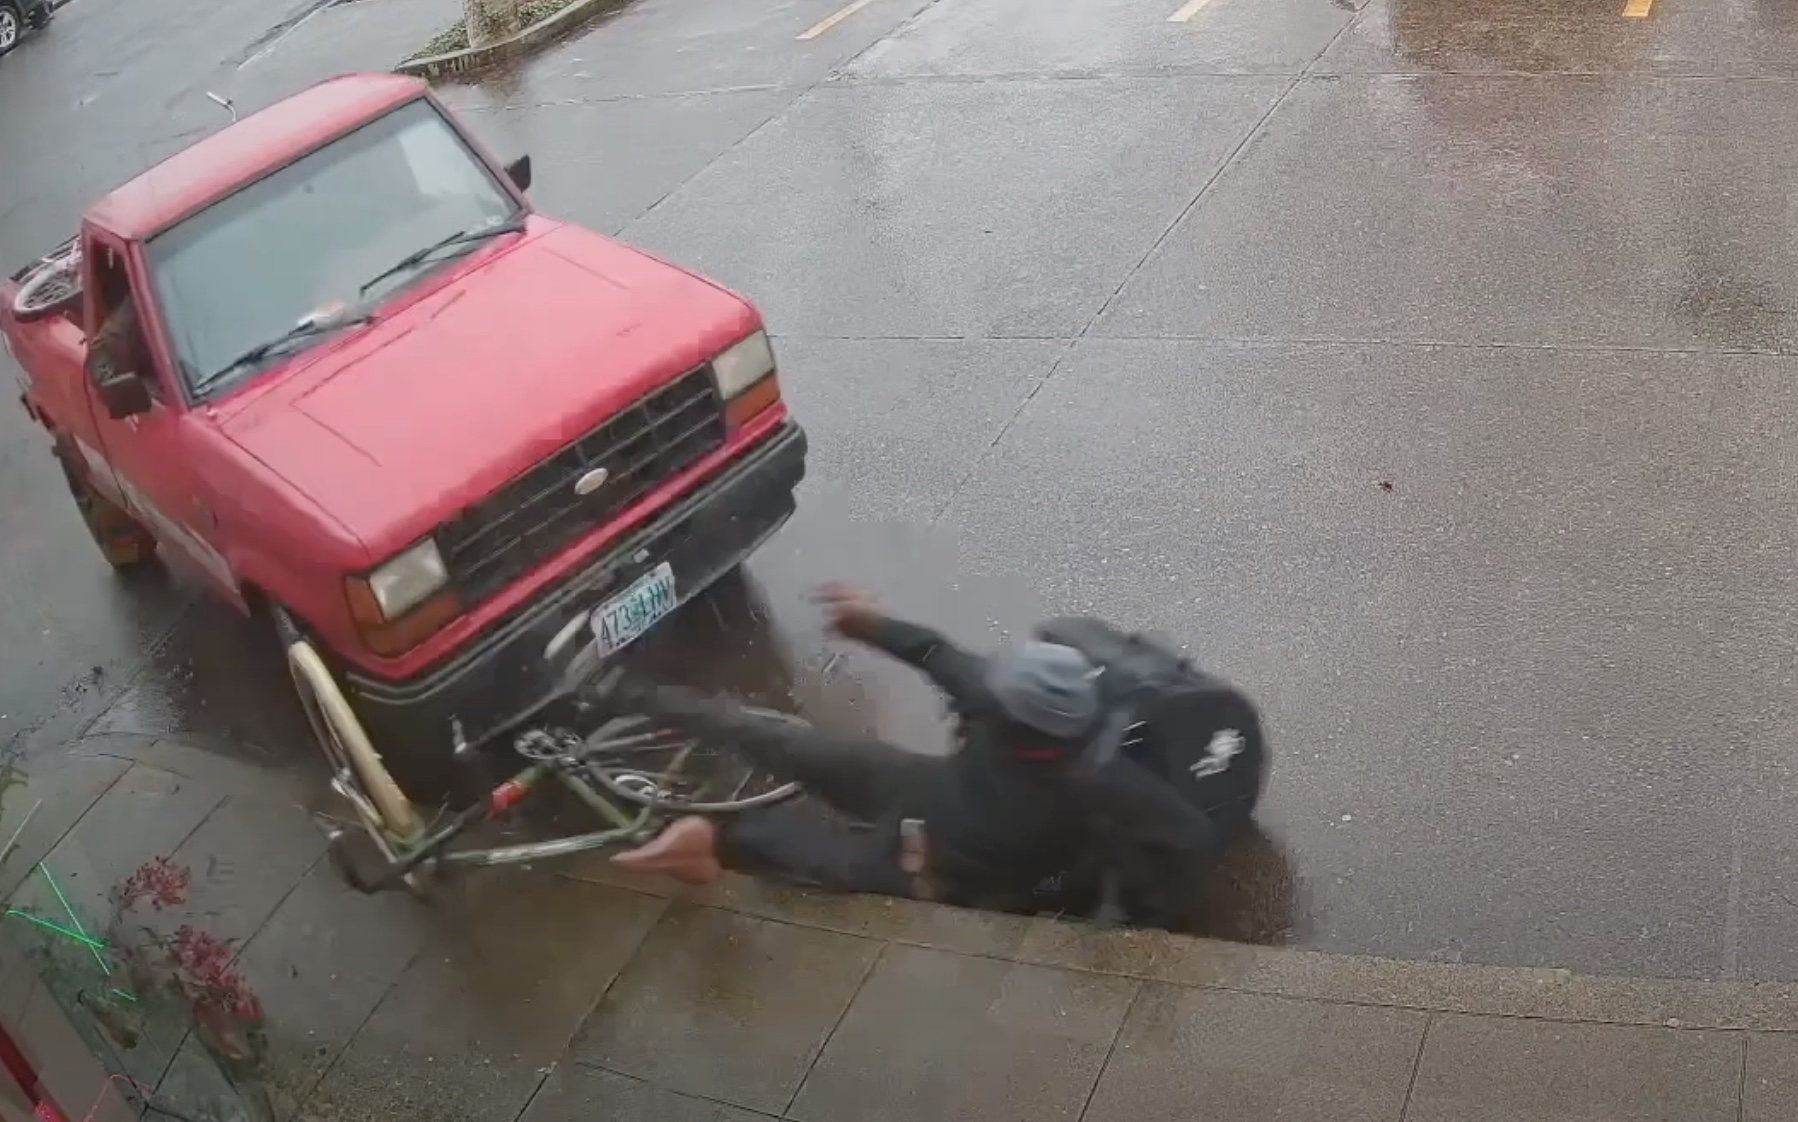 Video shows another intentional vehicular assault on a bicycle rider